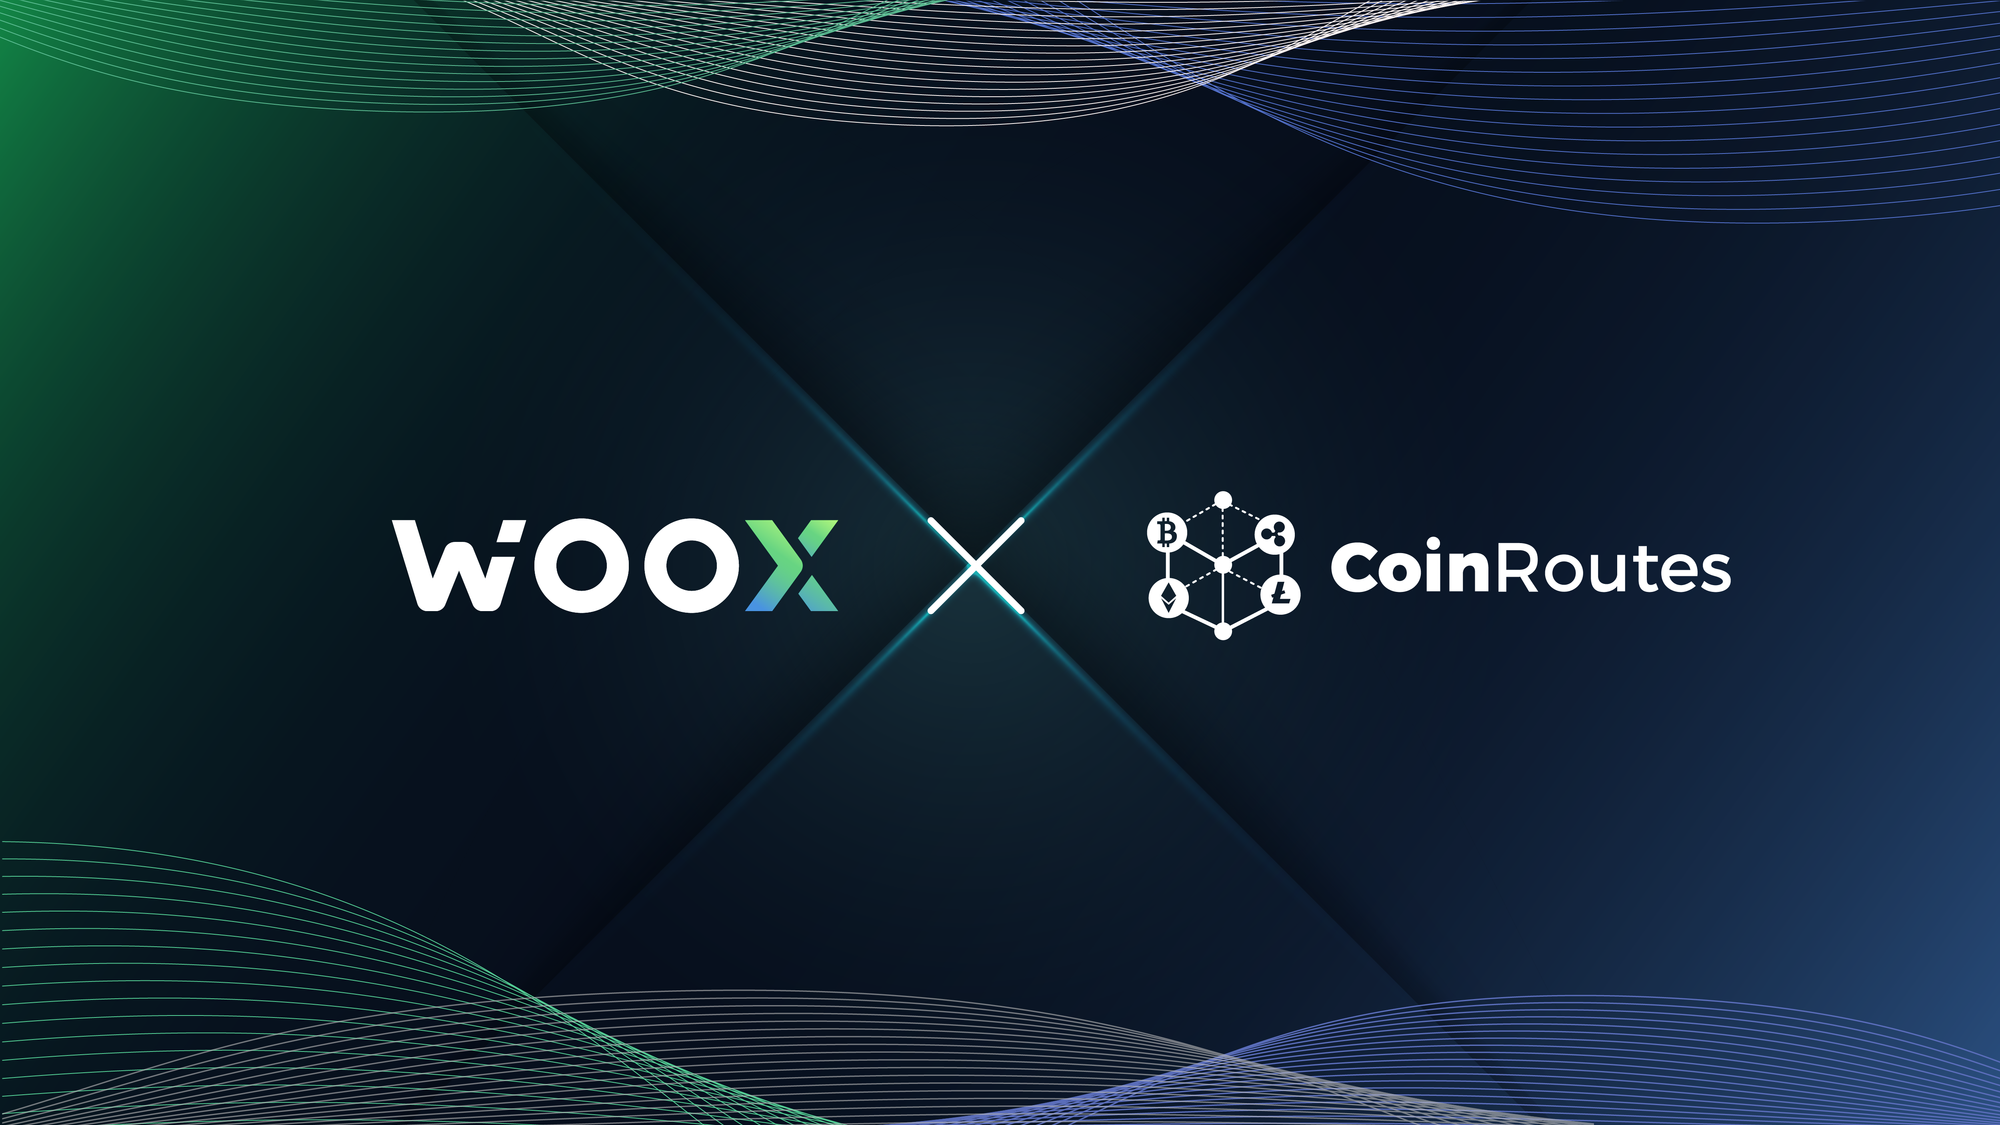 WOO X integrates with CoinRoutes